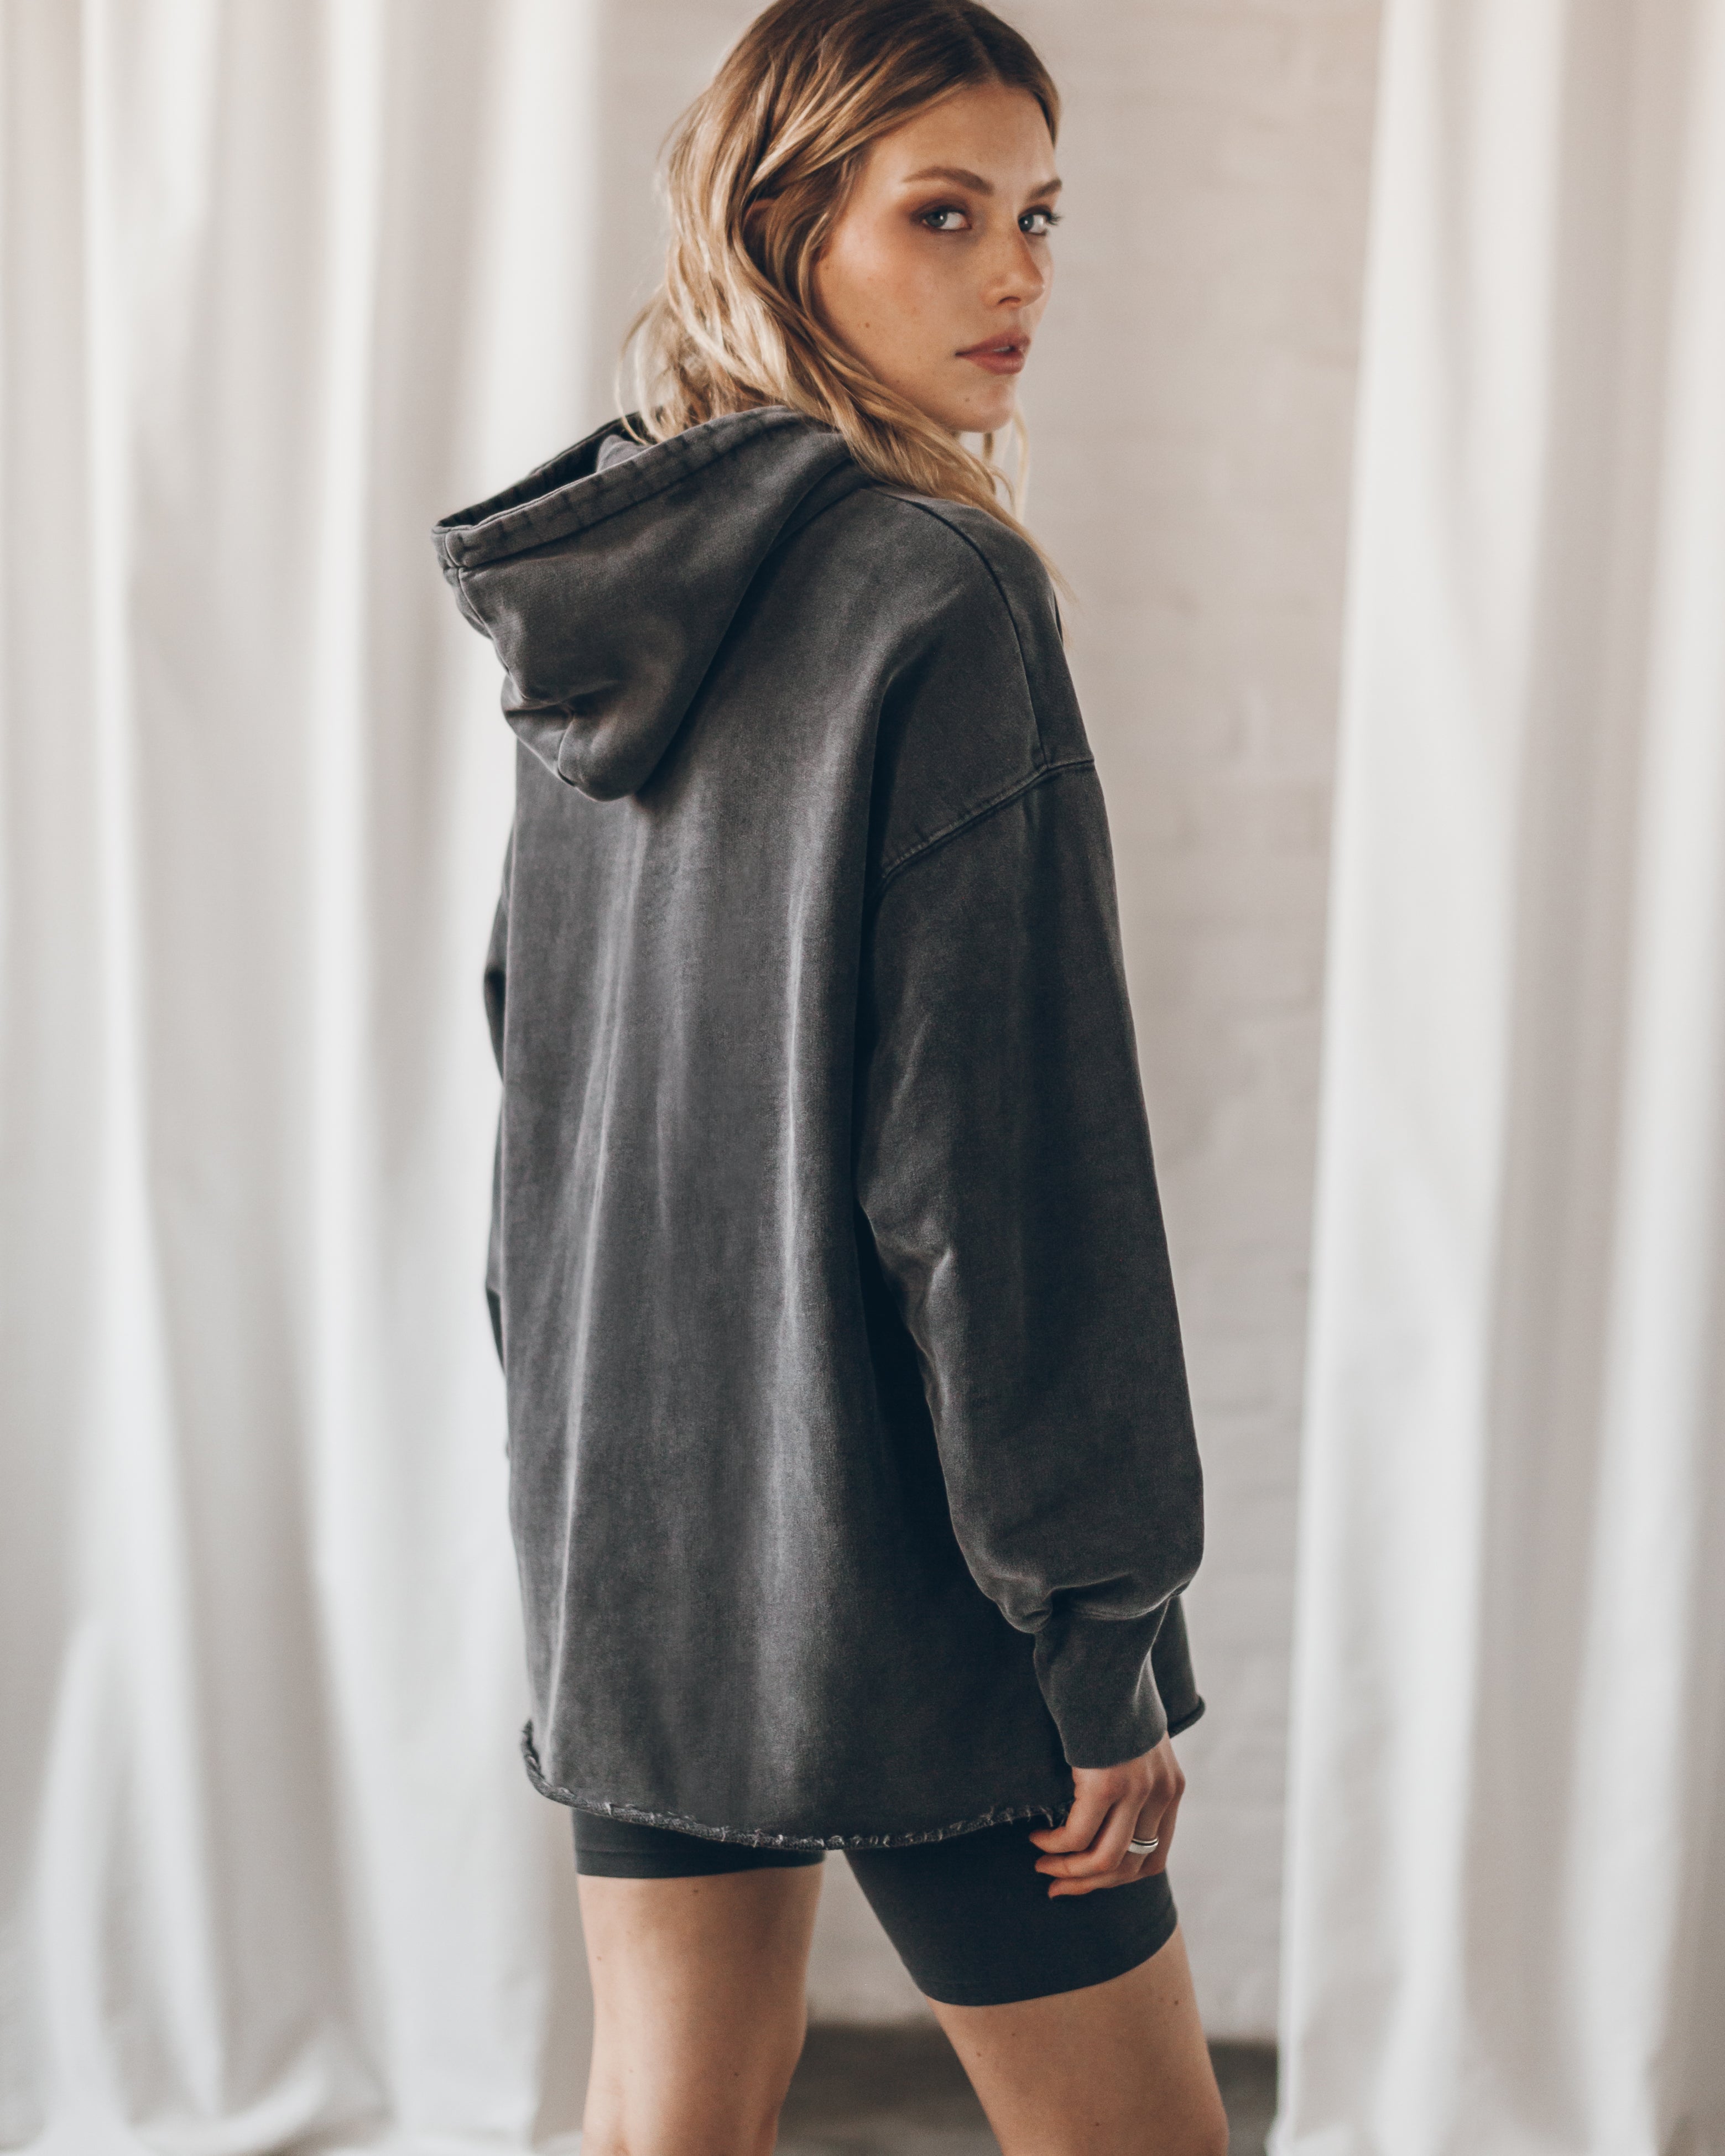 The Grey Faded Long Base Hoodie